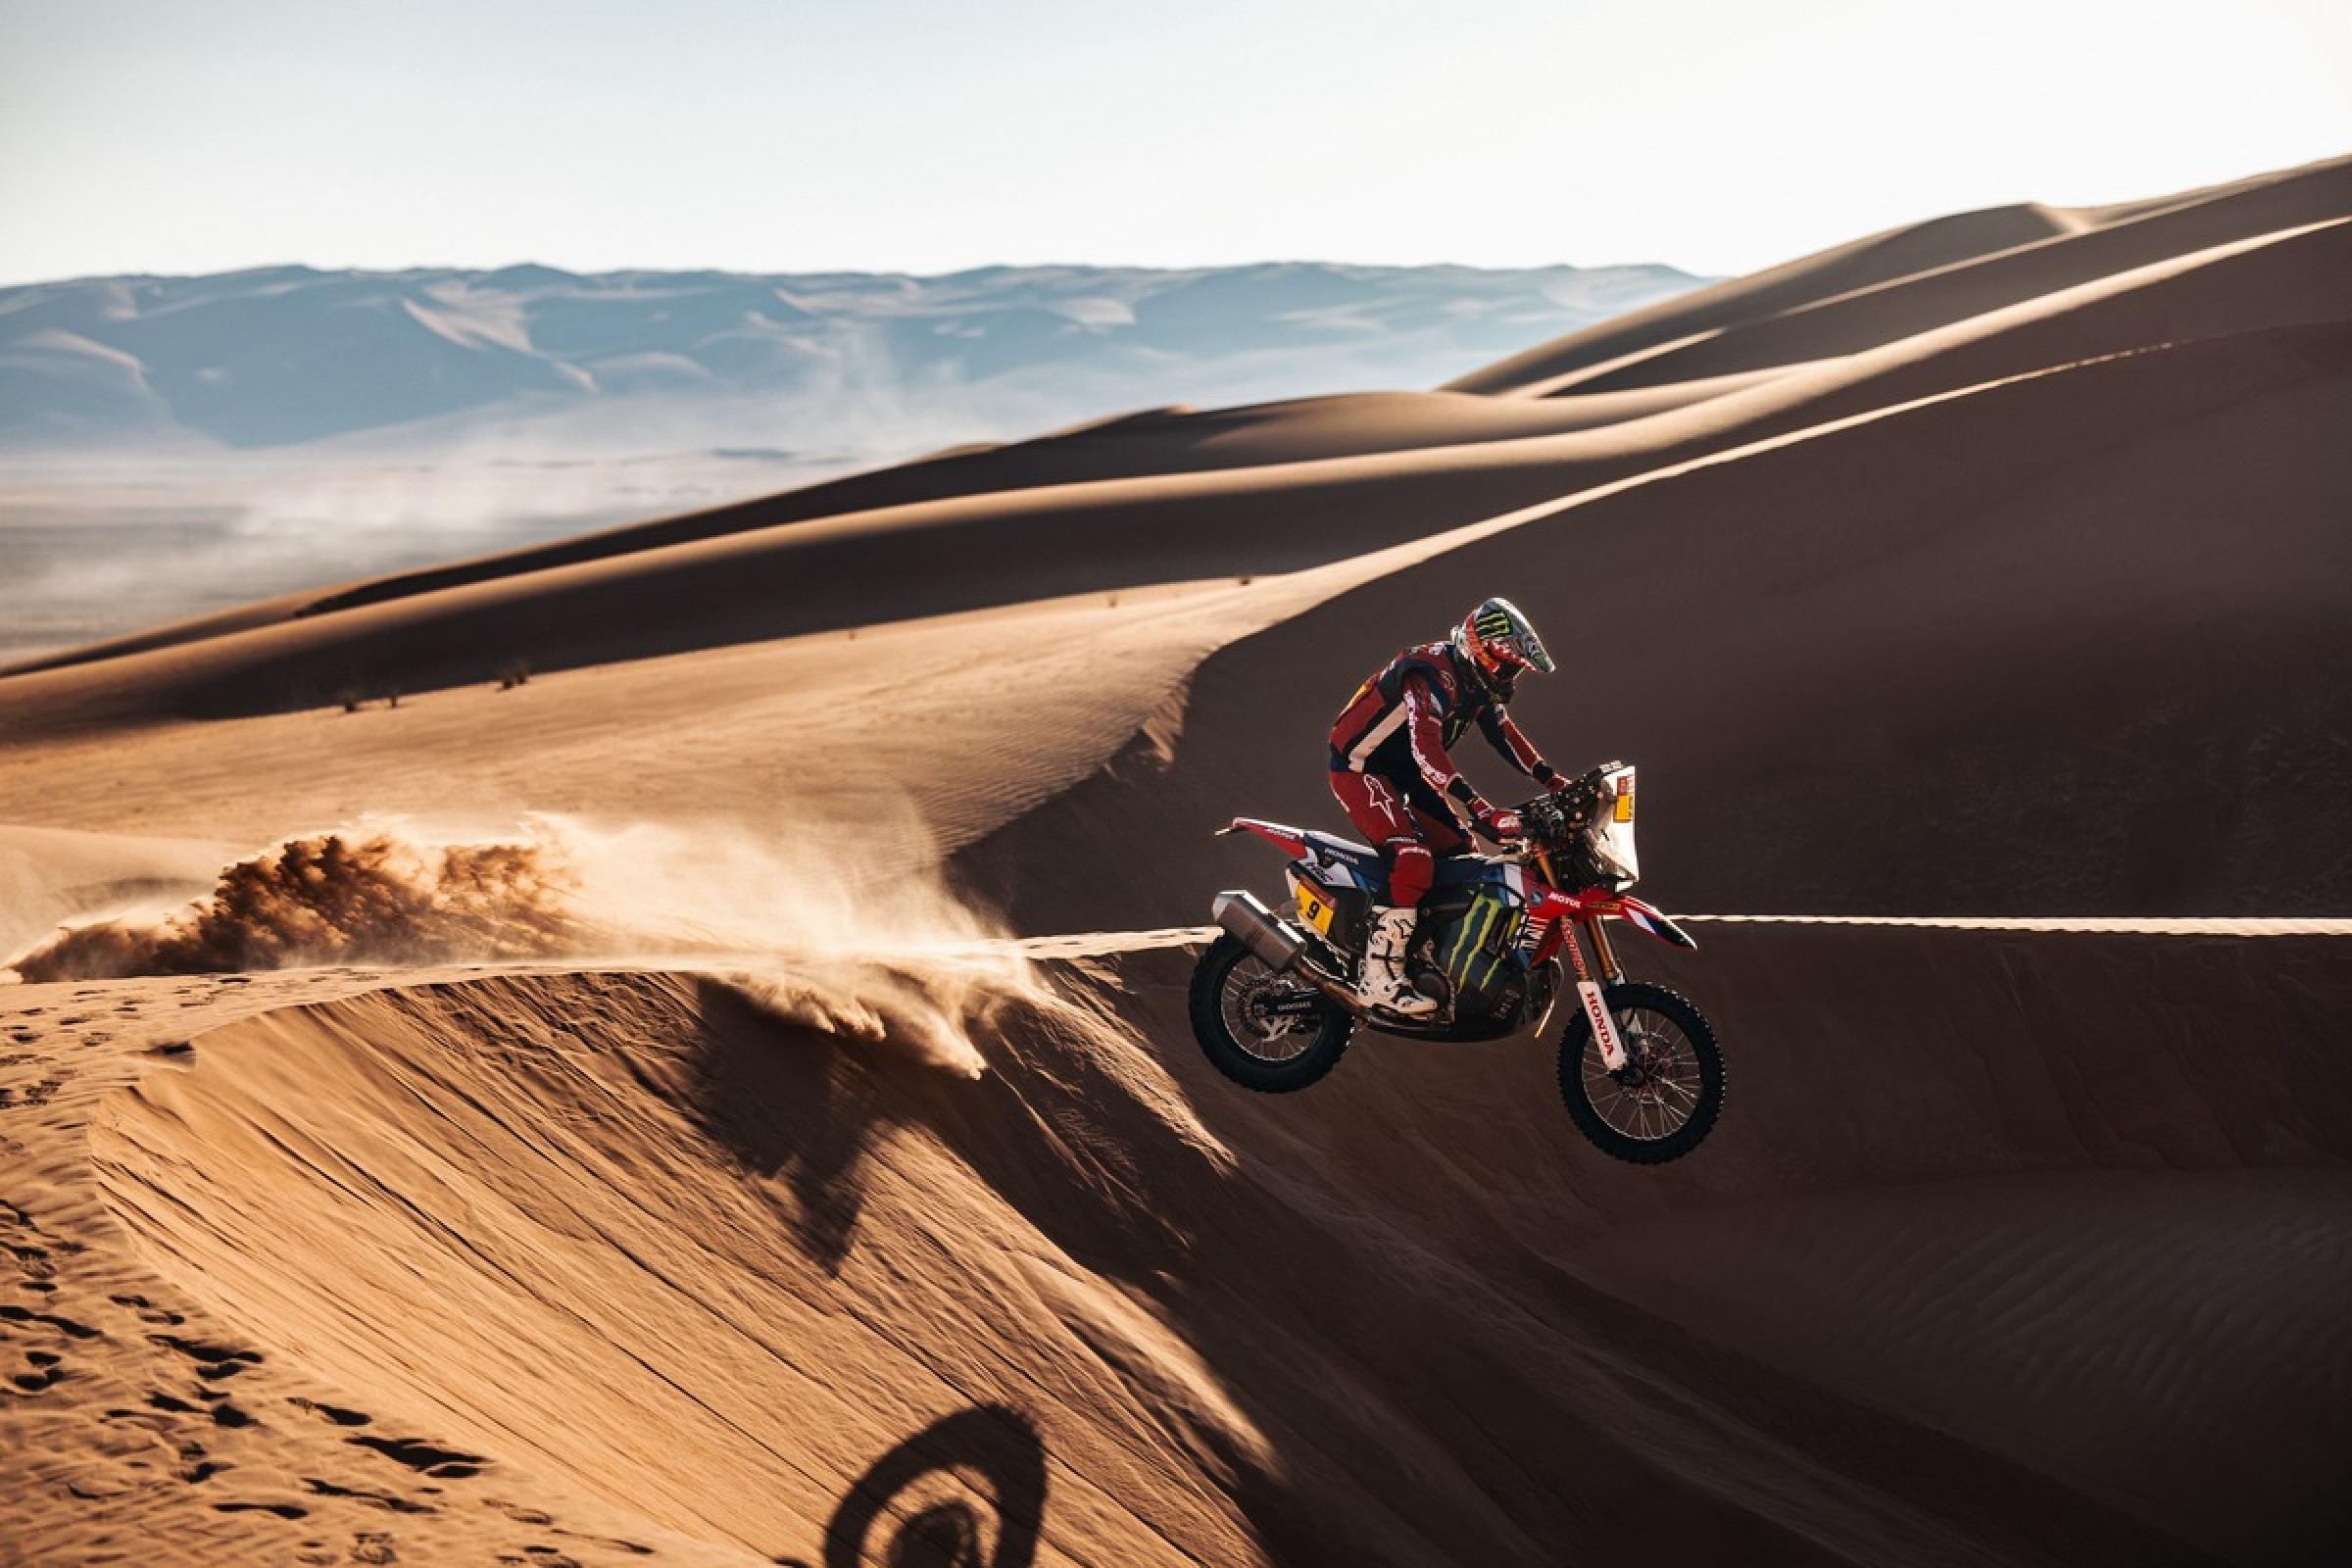 American Ricky Brabec Leads Dakar Rally Past Midway Point